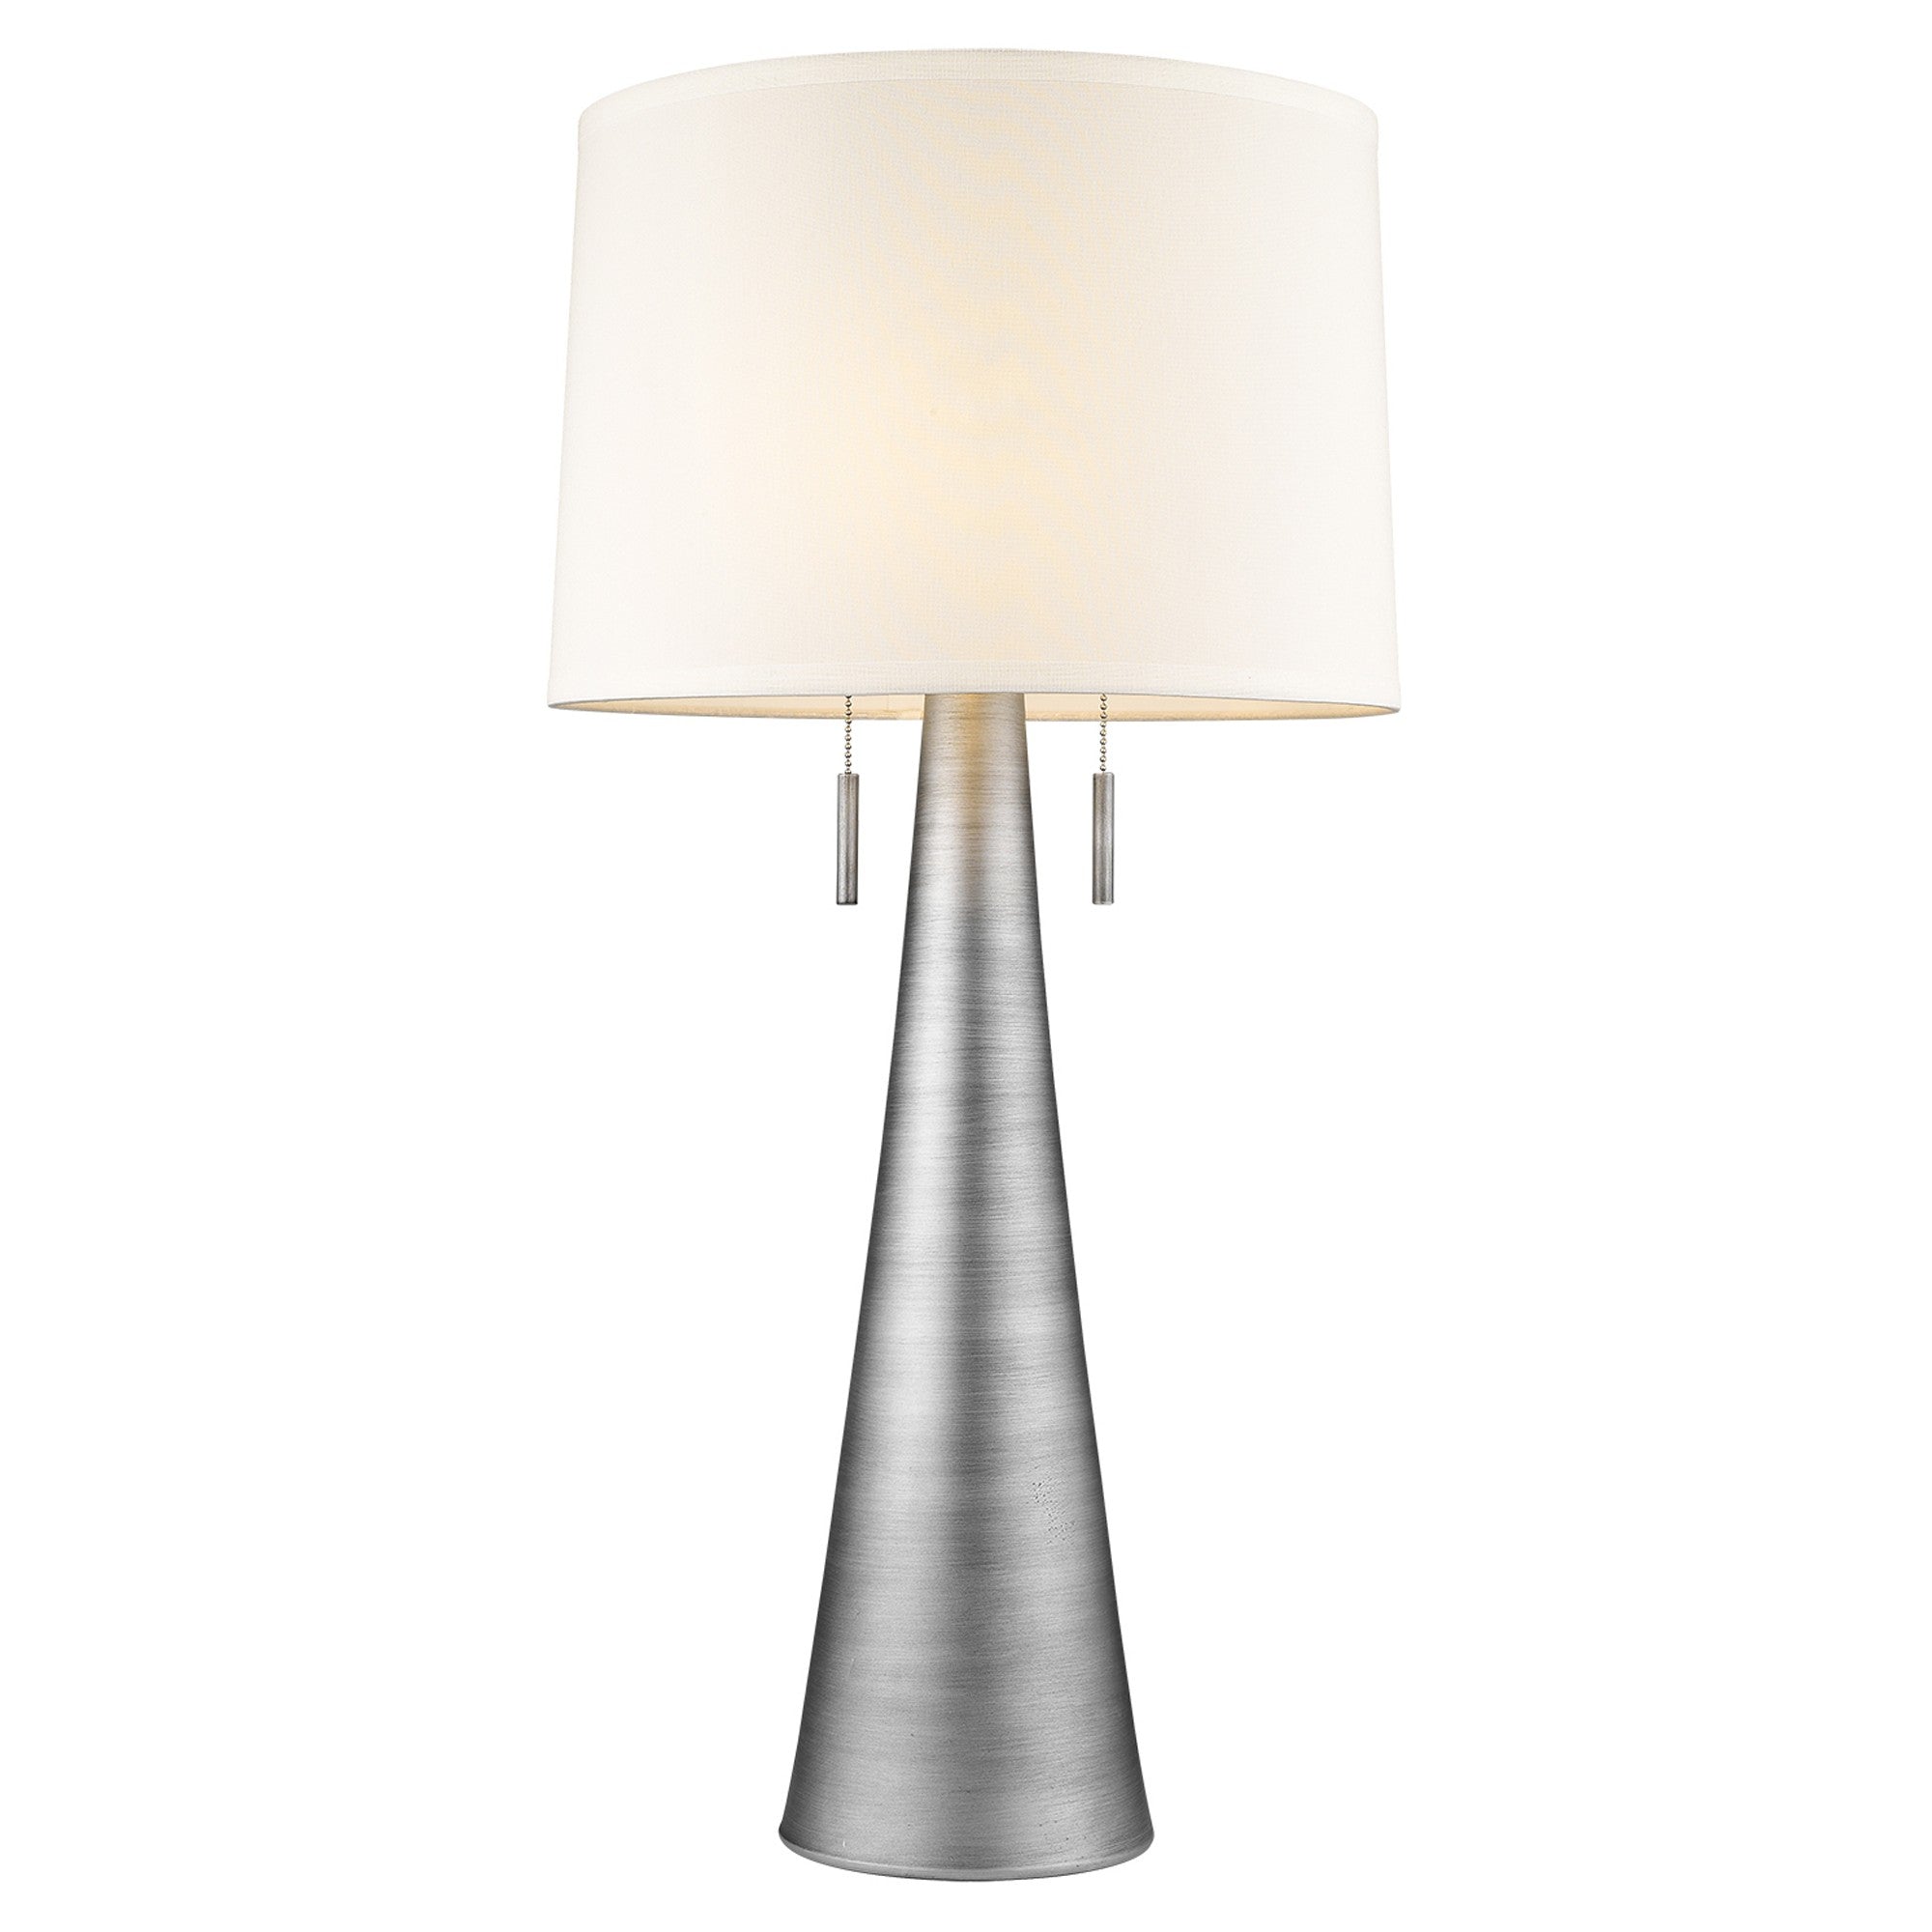 34" Silver Metal Two Light Table Lamp With White Empire Shade